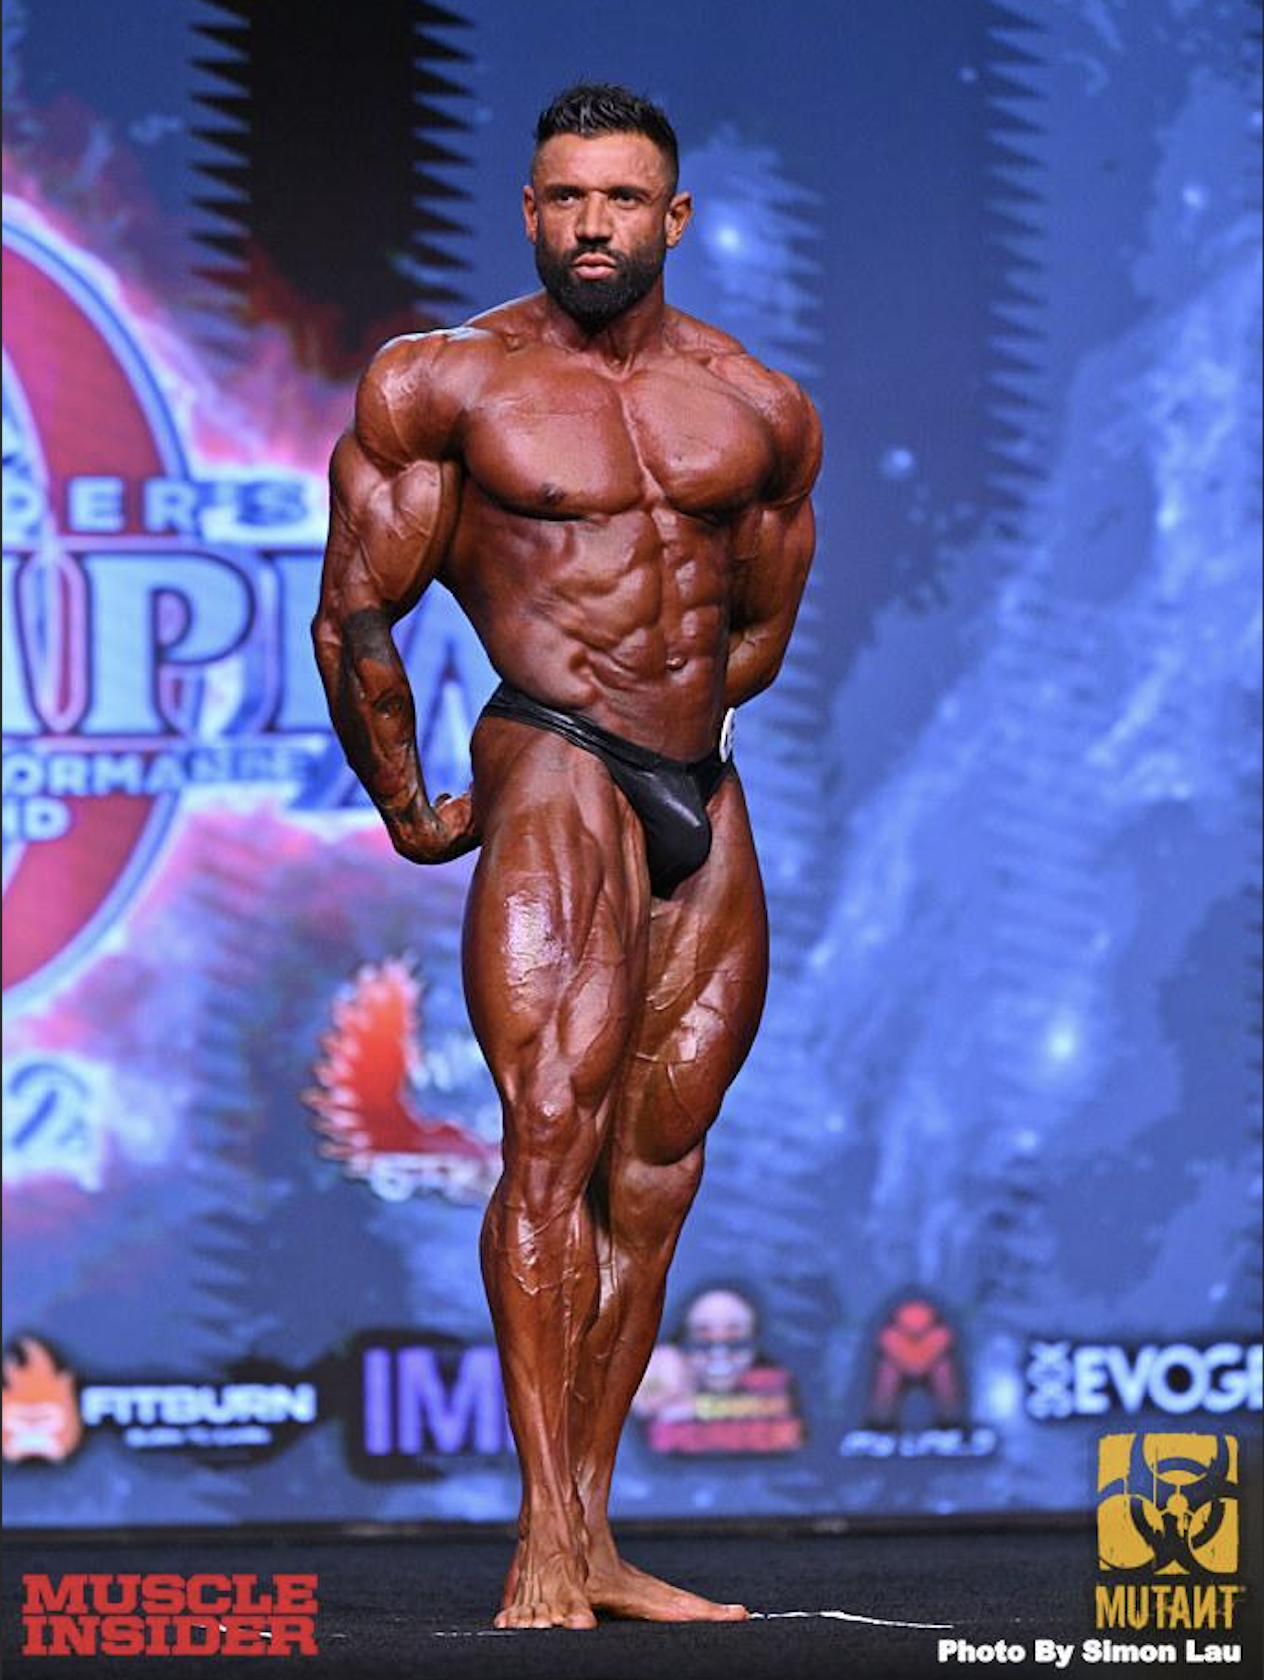 Bodybuilder Neil Currey Dead At 34, Competed In 2022 Mr. Olympia